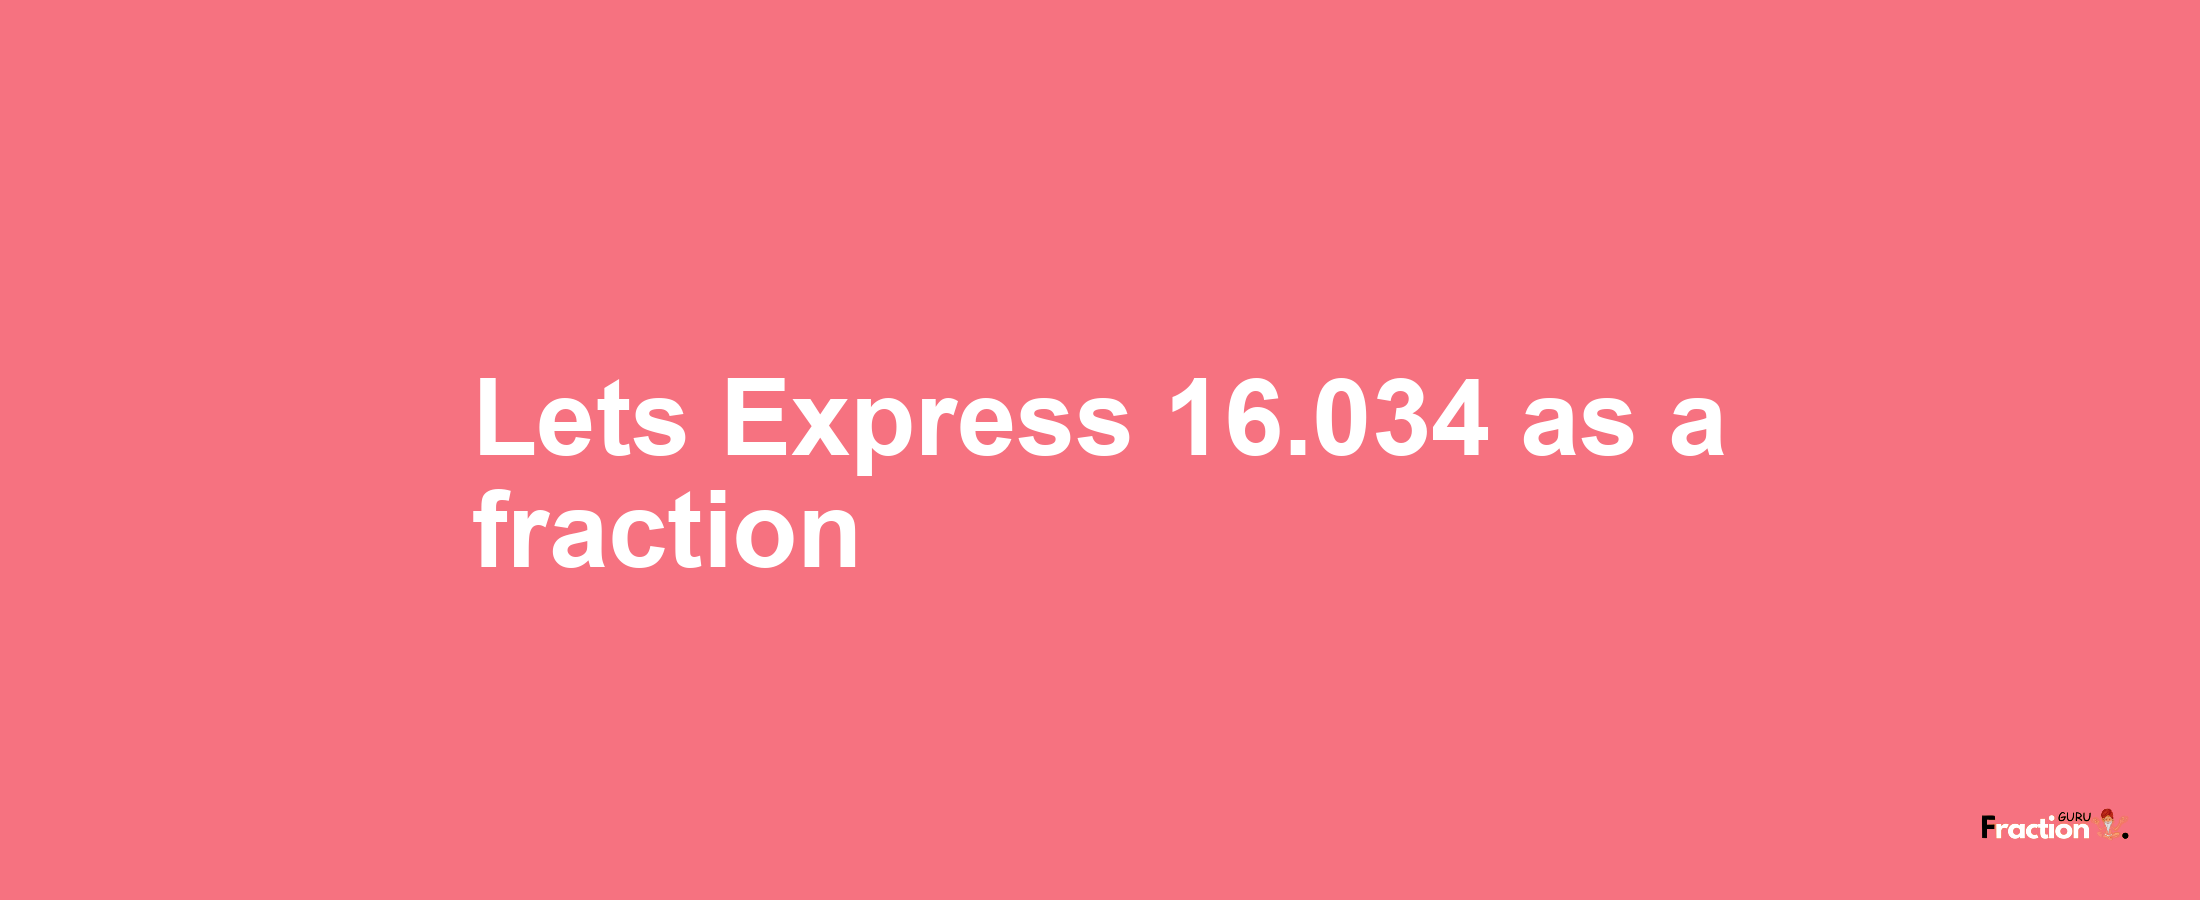 Lets Express 16.034 as afraction